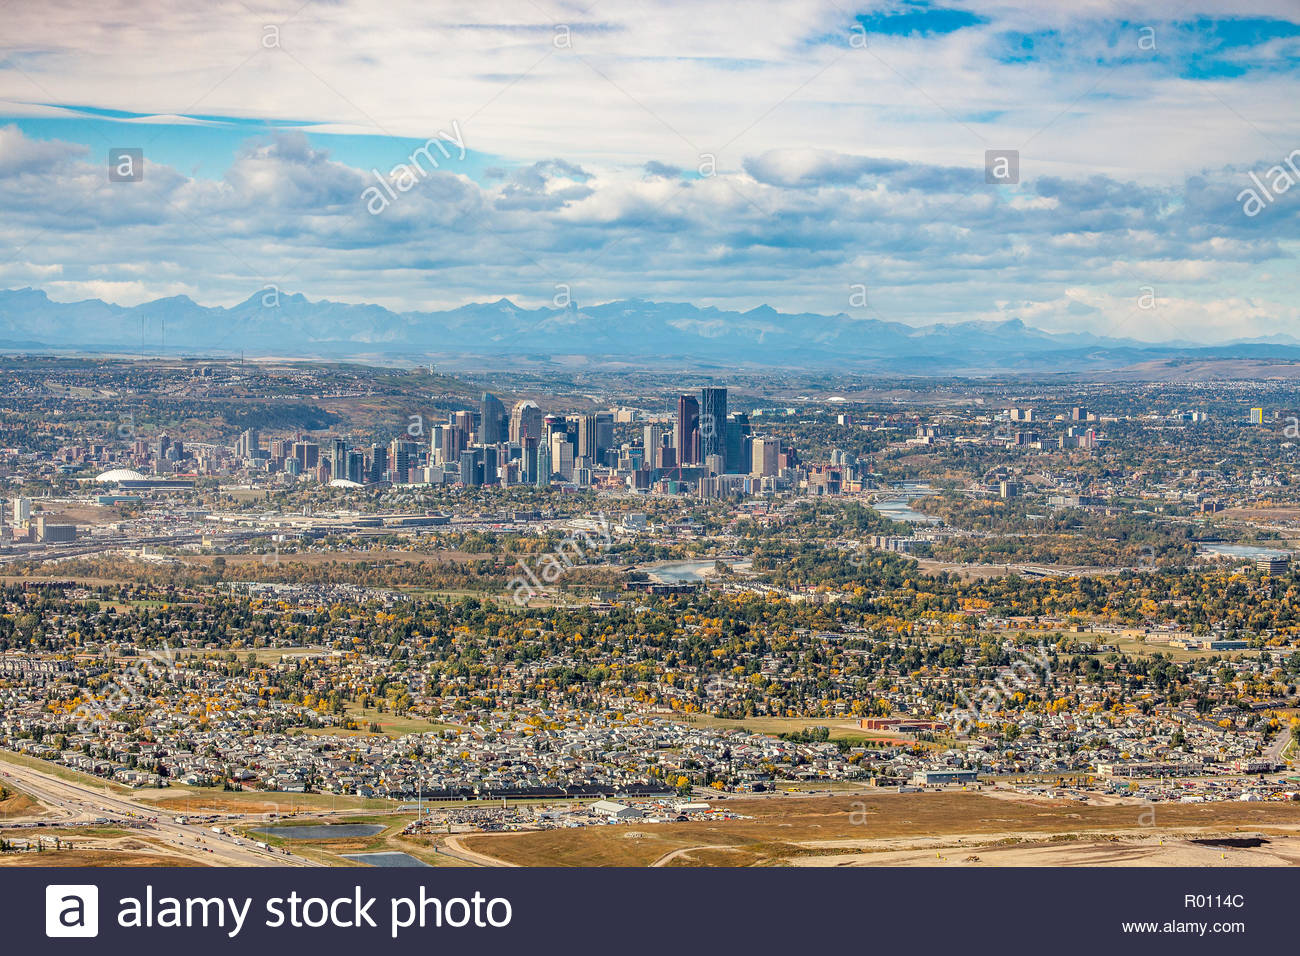 Aerial view of the city of Calgary Alberta Canada with the Rocky